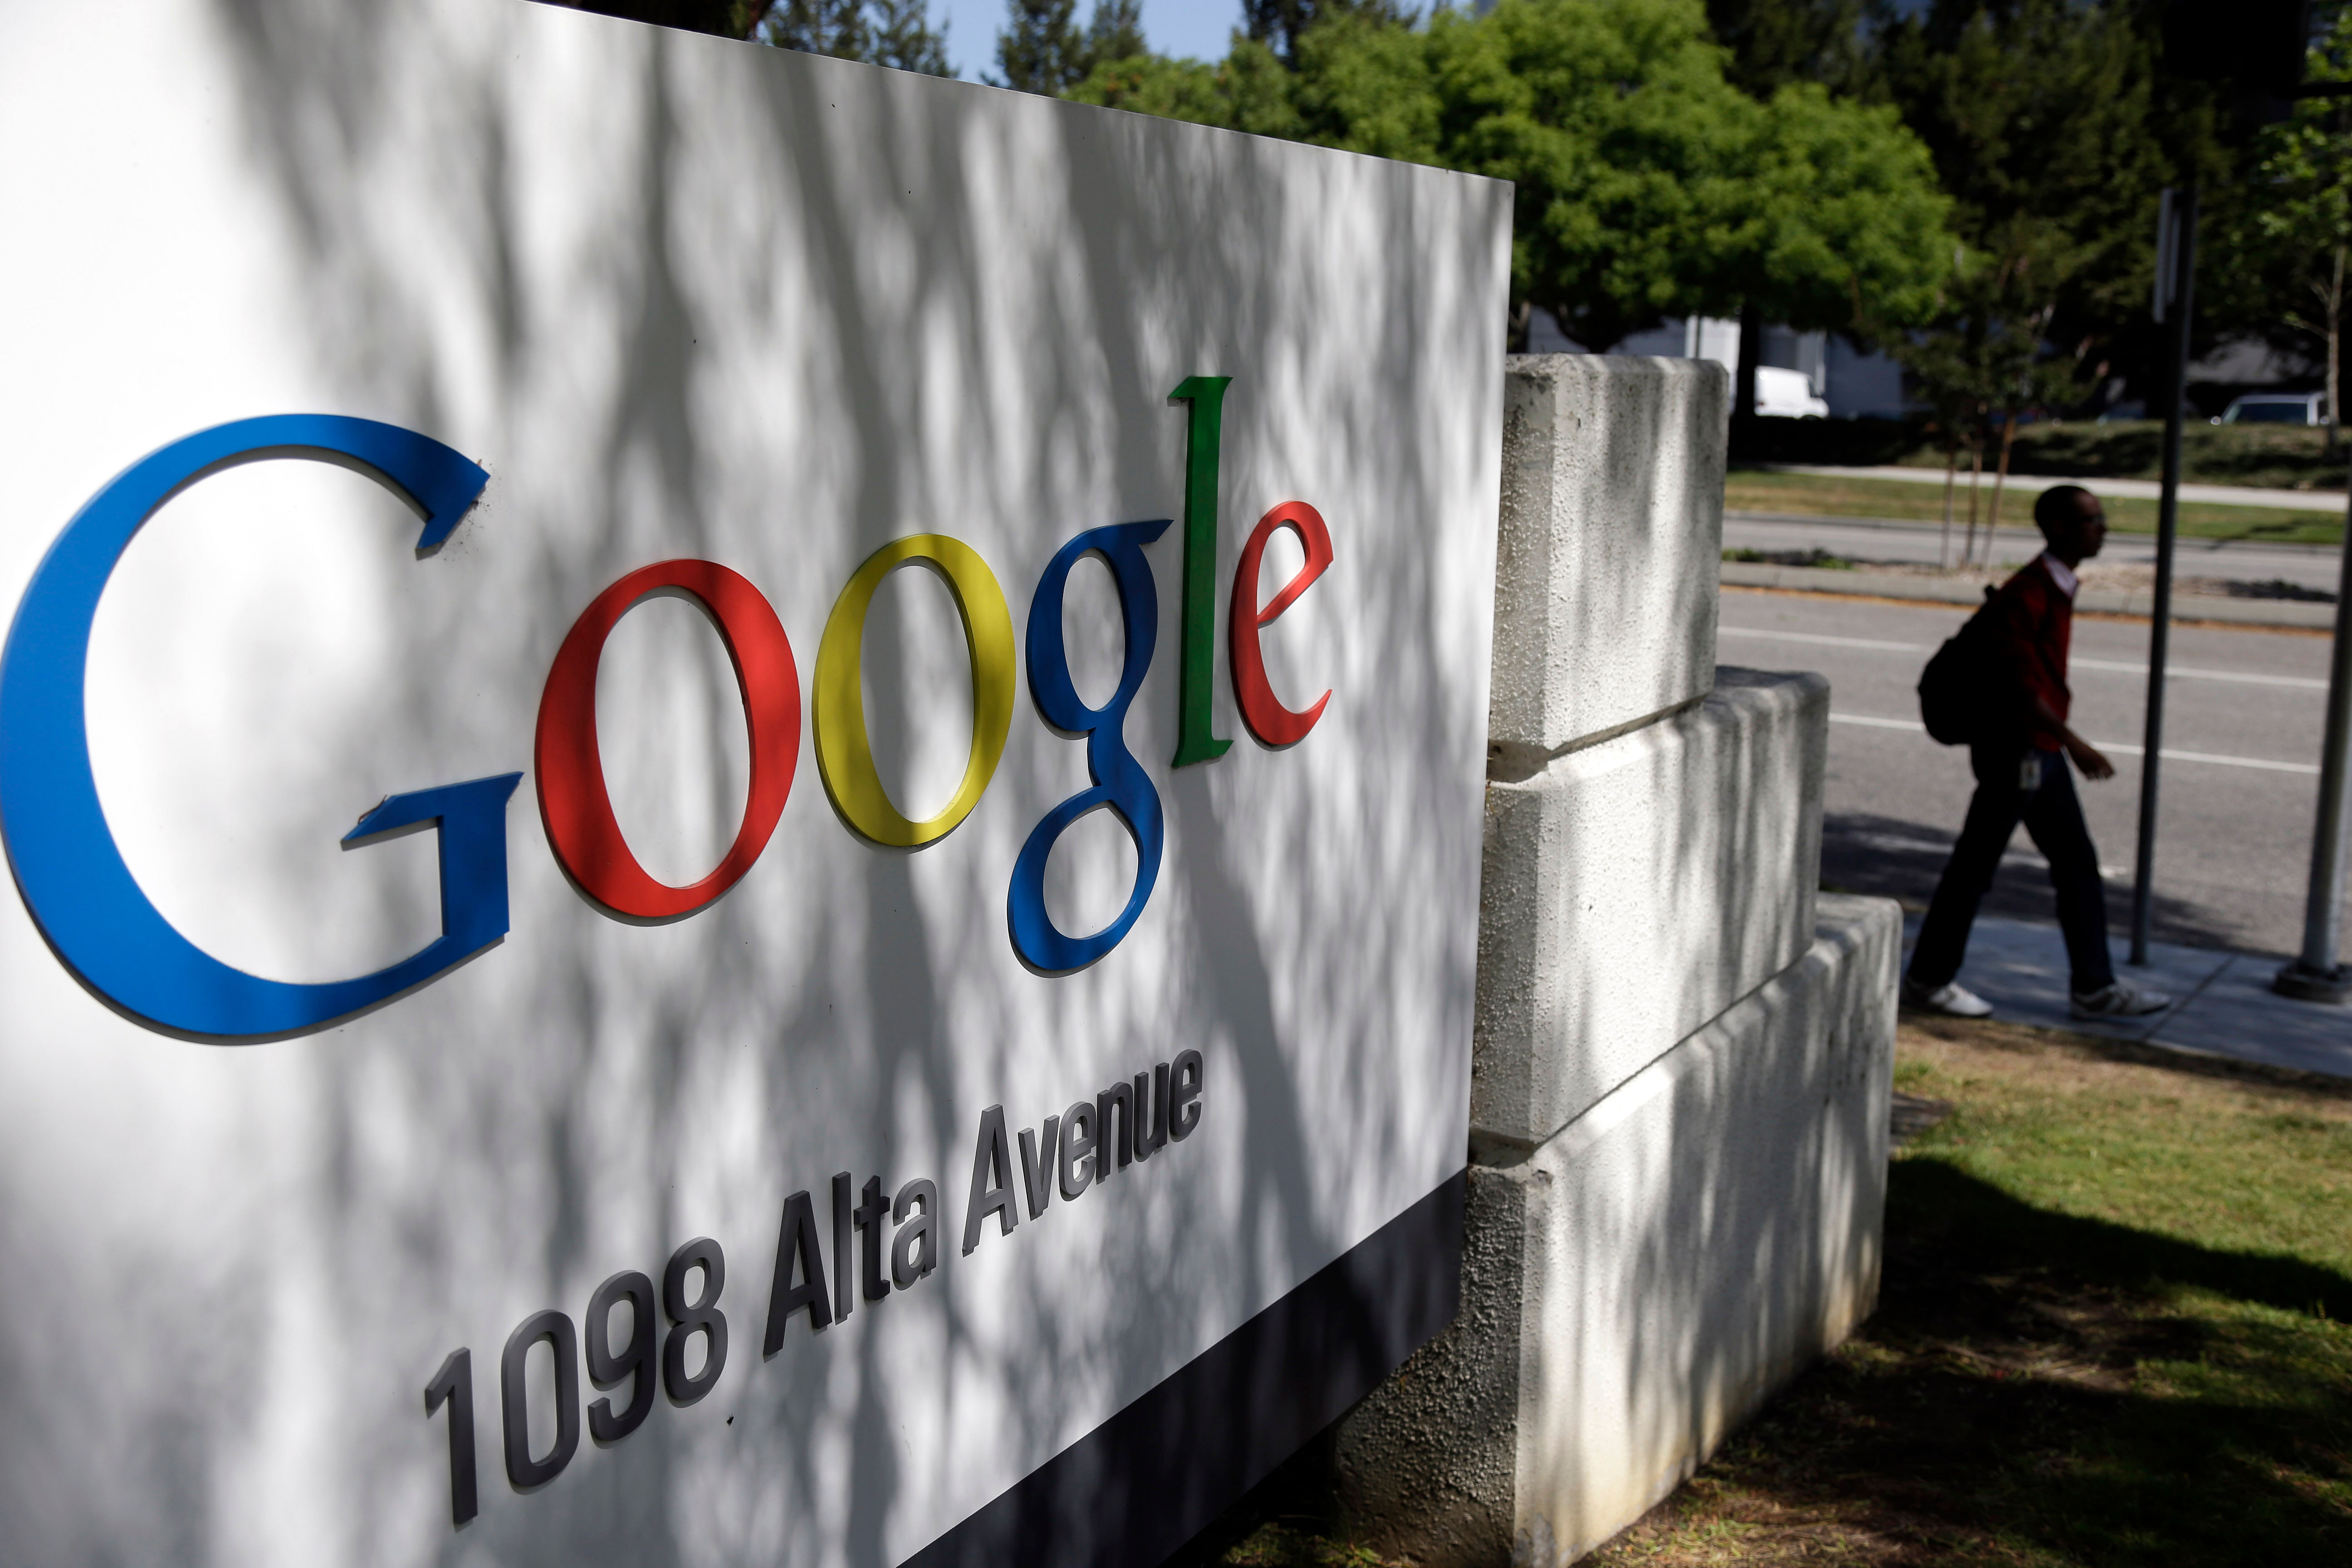 Driven by increasing penetration of affordable smartphones and cheaper data plans, voice-based search is expected to witness manifold growth in the next few years in India, search giant Google said today. AP File Photo